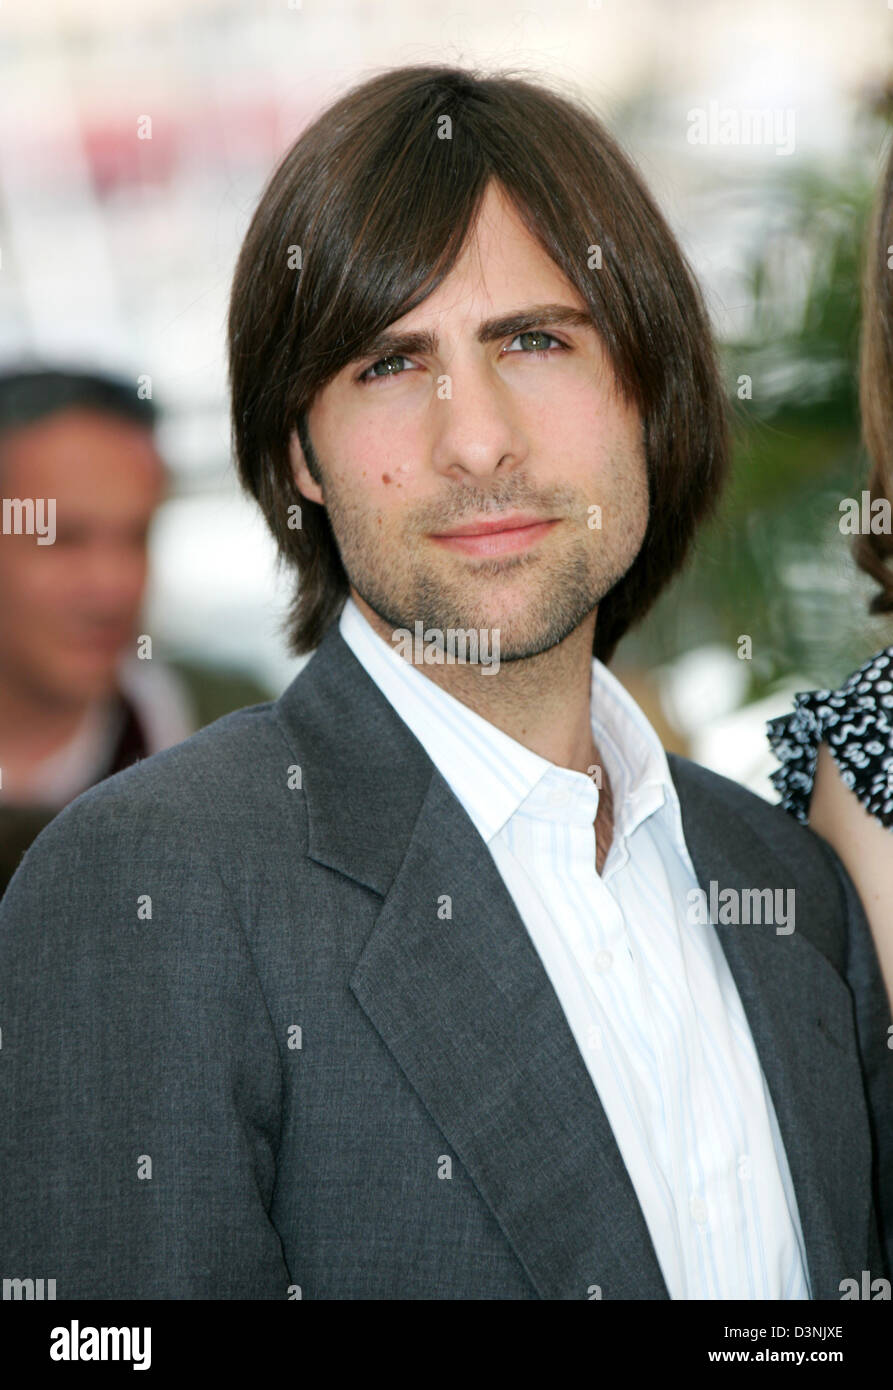 US actor Jason Schwartzman poses at the photocall of the film 'Marie Antoinette' at the Palais des Festivals, Cannes, France, Wednesday, 24 May 2006. Photo: Hubert Boesl Stock Photo